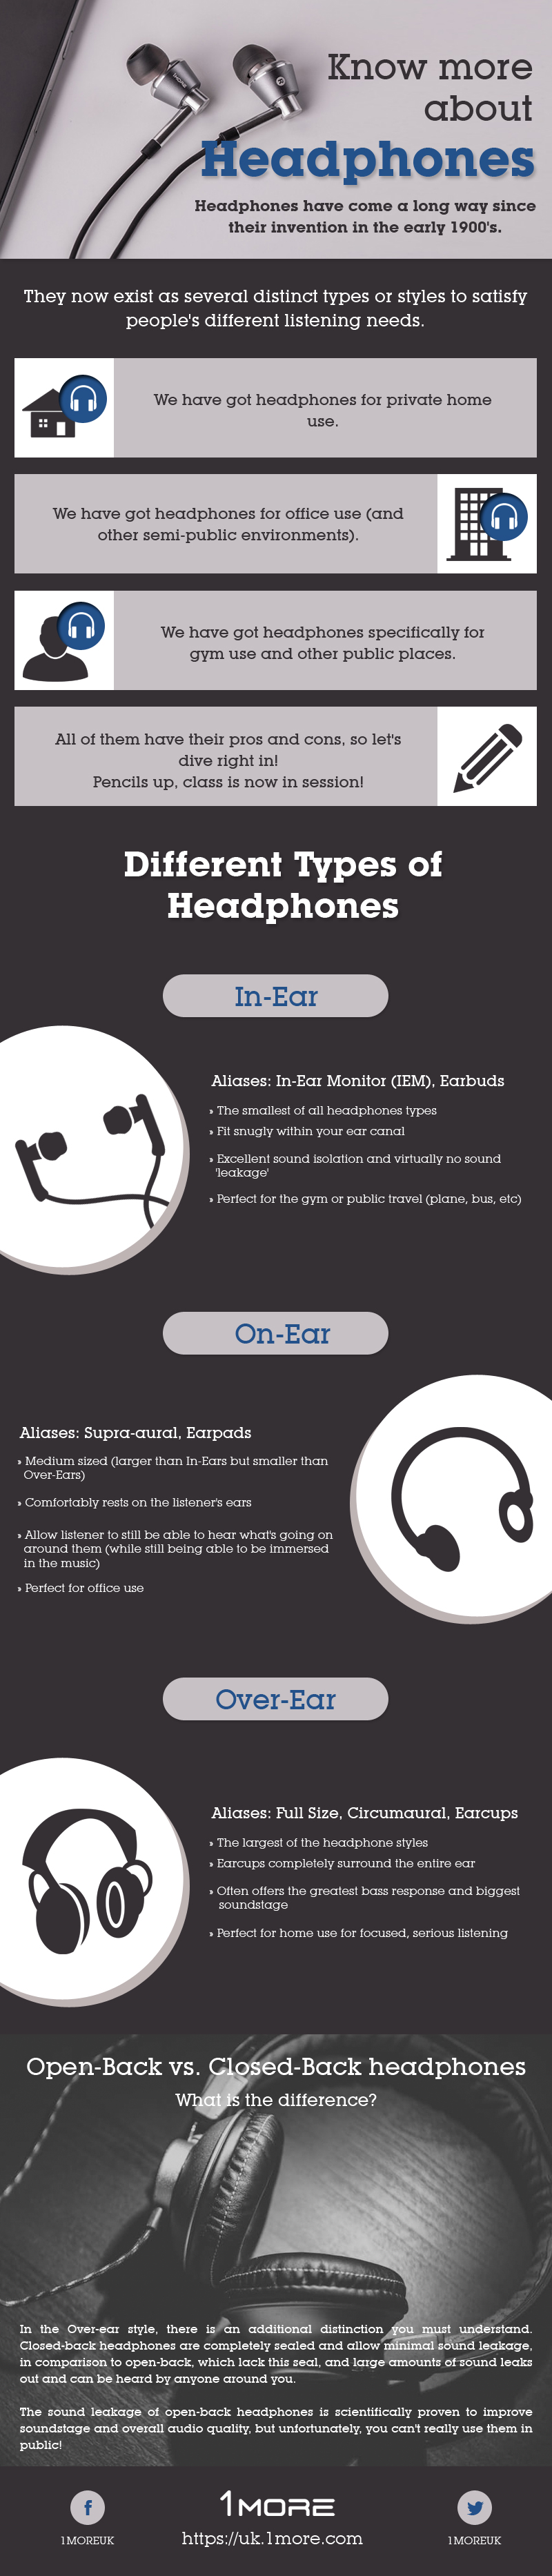 Know More about Headphones [Infographic] | Techno FAQ